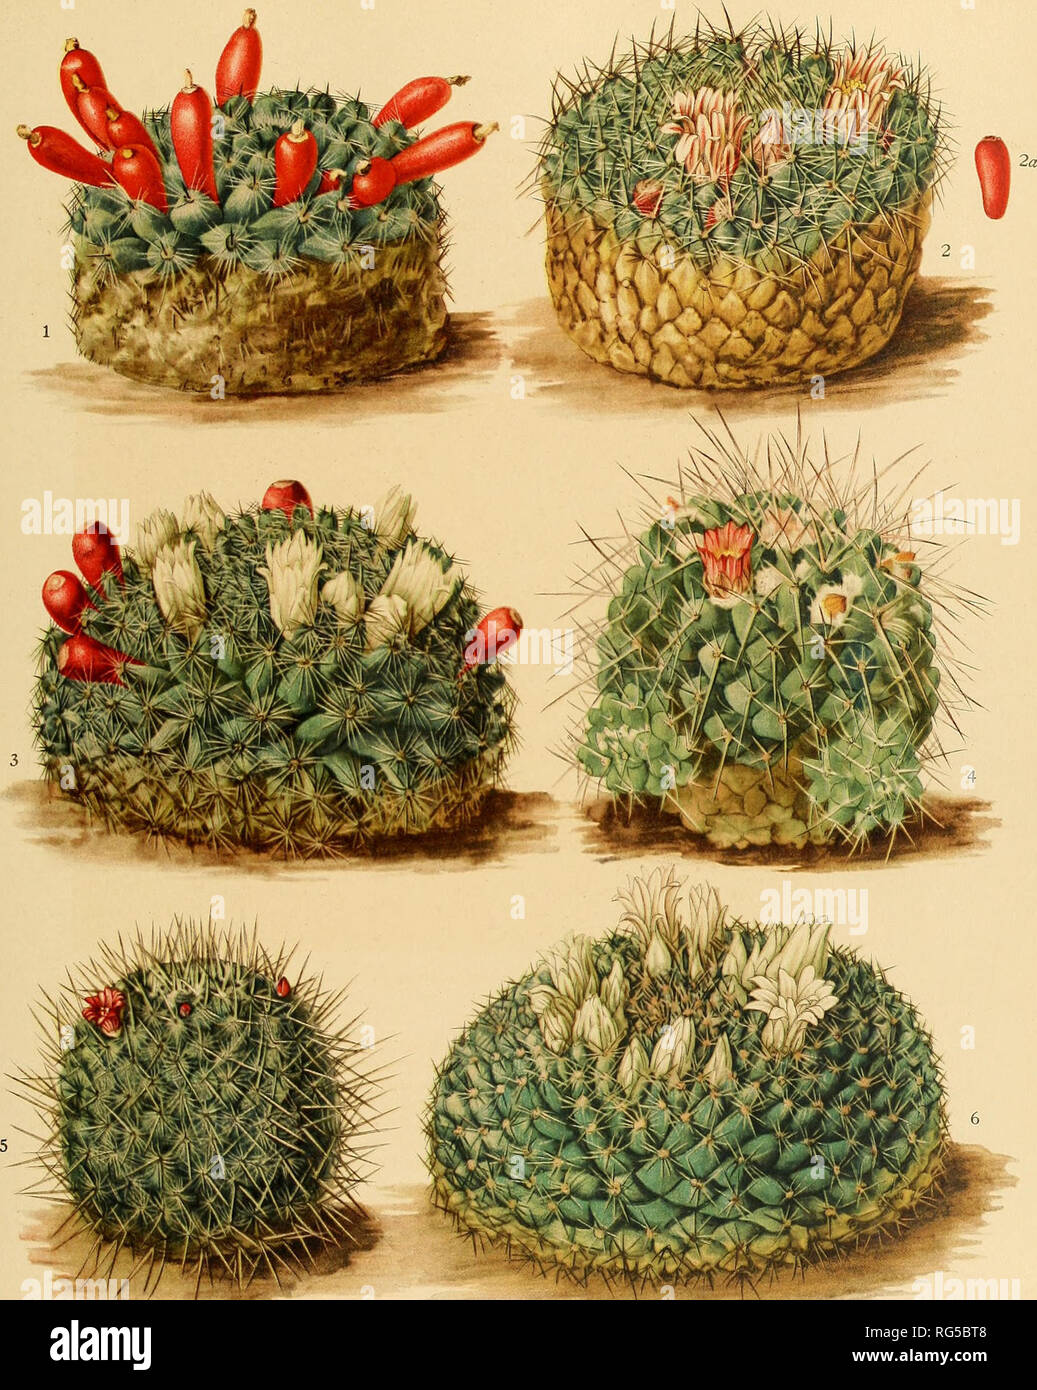 . The Cactaceae : descriptions and illustrations of plants of the cactus family. BRITTON AND ROSE, VOL. IV. M. E. Eaton del. 1. Fruiting plant of Neomammillaria gaumeri. 4. 'Blo^e.rin^ •pX'sxA oi Neo7nammillaria compressa. 2. VQ^exrg ^X'^n'i Qi Neomam7nillaria heyderi. 5. Flowering plant of yVd'(7wa;^OTz7/flrz« geminispina. 2a. Fruit of same. 6. '^o^&amp;Ln.'g^2MtoiNeoma7nmUlariaheinisphaerita. 3. Flowering and fruiting plant of Neo^nanimillaria hemisphaerica.. Please note that these images are extracted from scanned page images that may have been digitally enhanced for readability - col Stock Photo